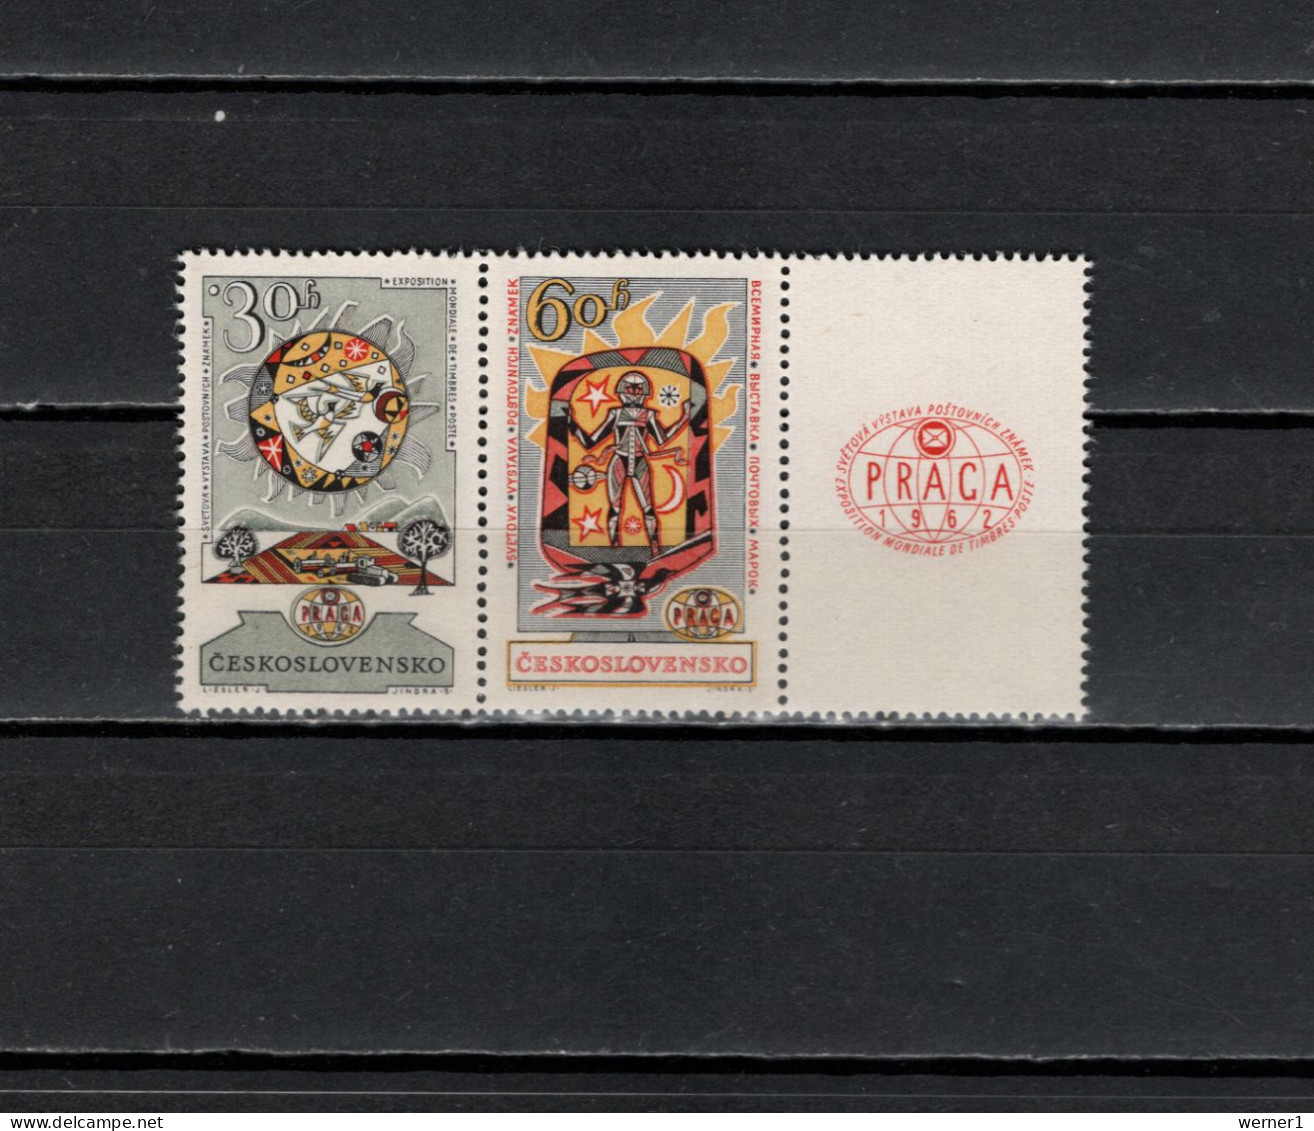 Czechoslovakia 1962 Space, Praga '62, 2 Stamps With Labels MNH - Europa